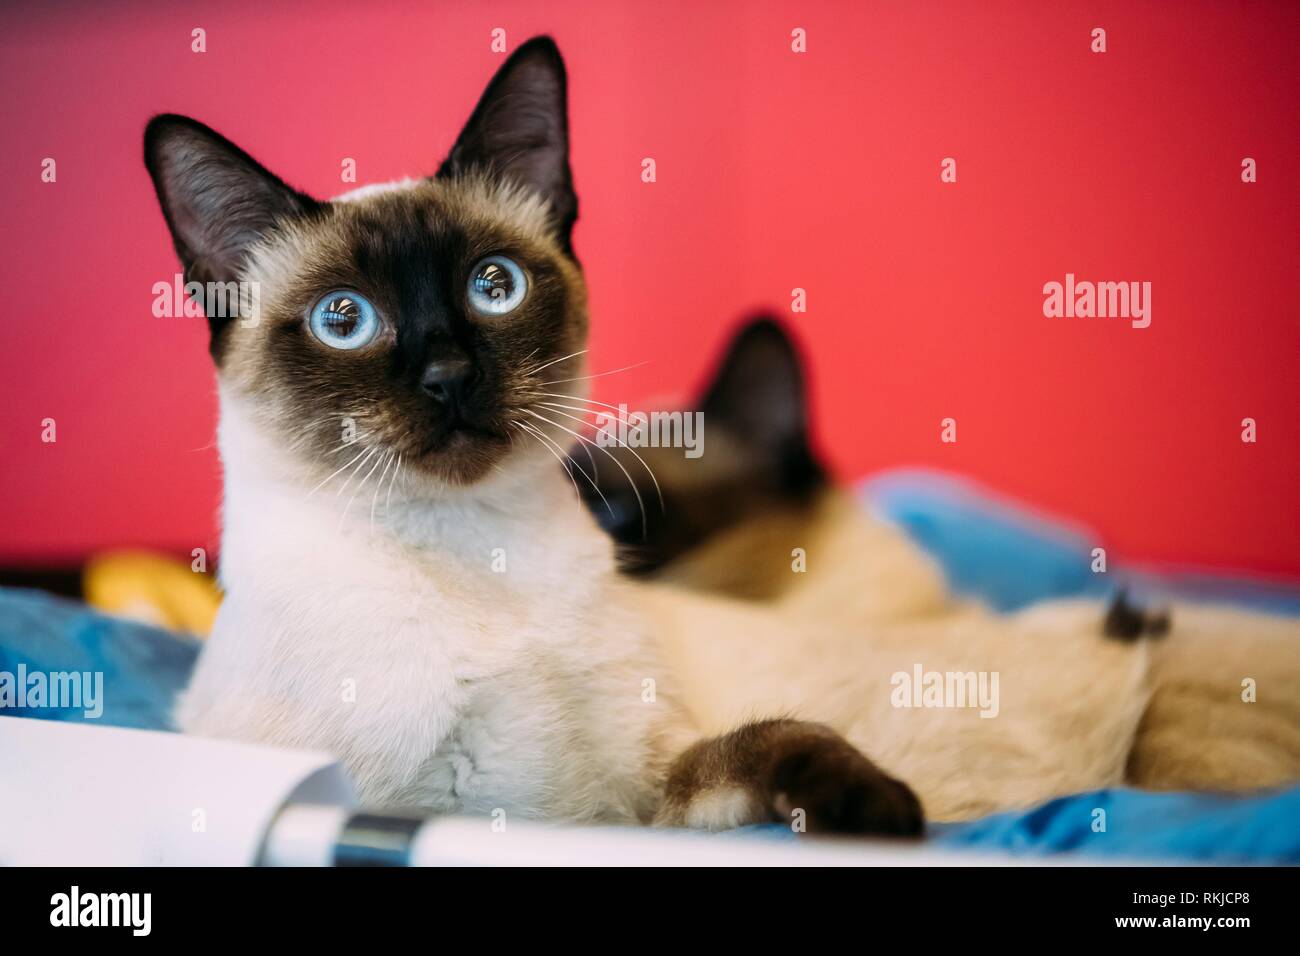 Close Up Portrait Of Mekong Bobtail Cat Kitten At Blurred Red Background Stock Photo Alamy